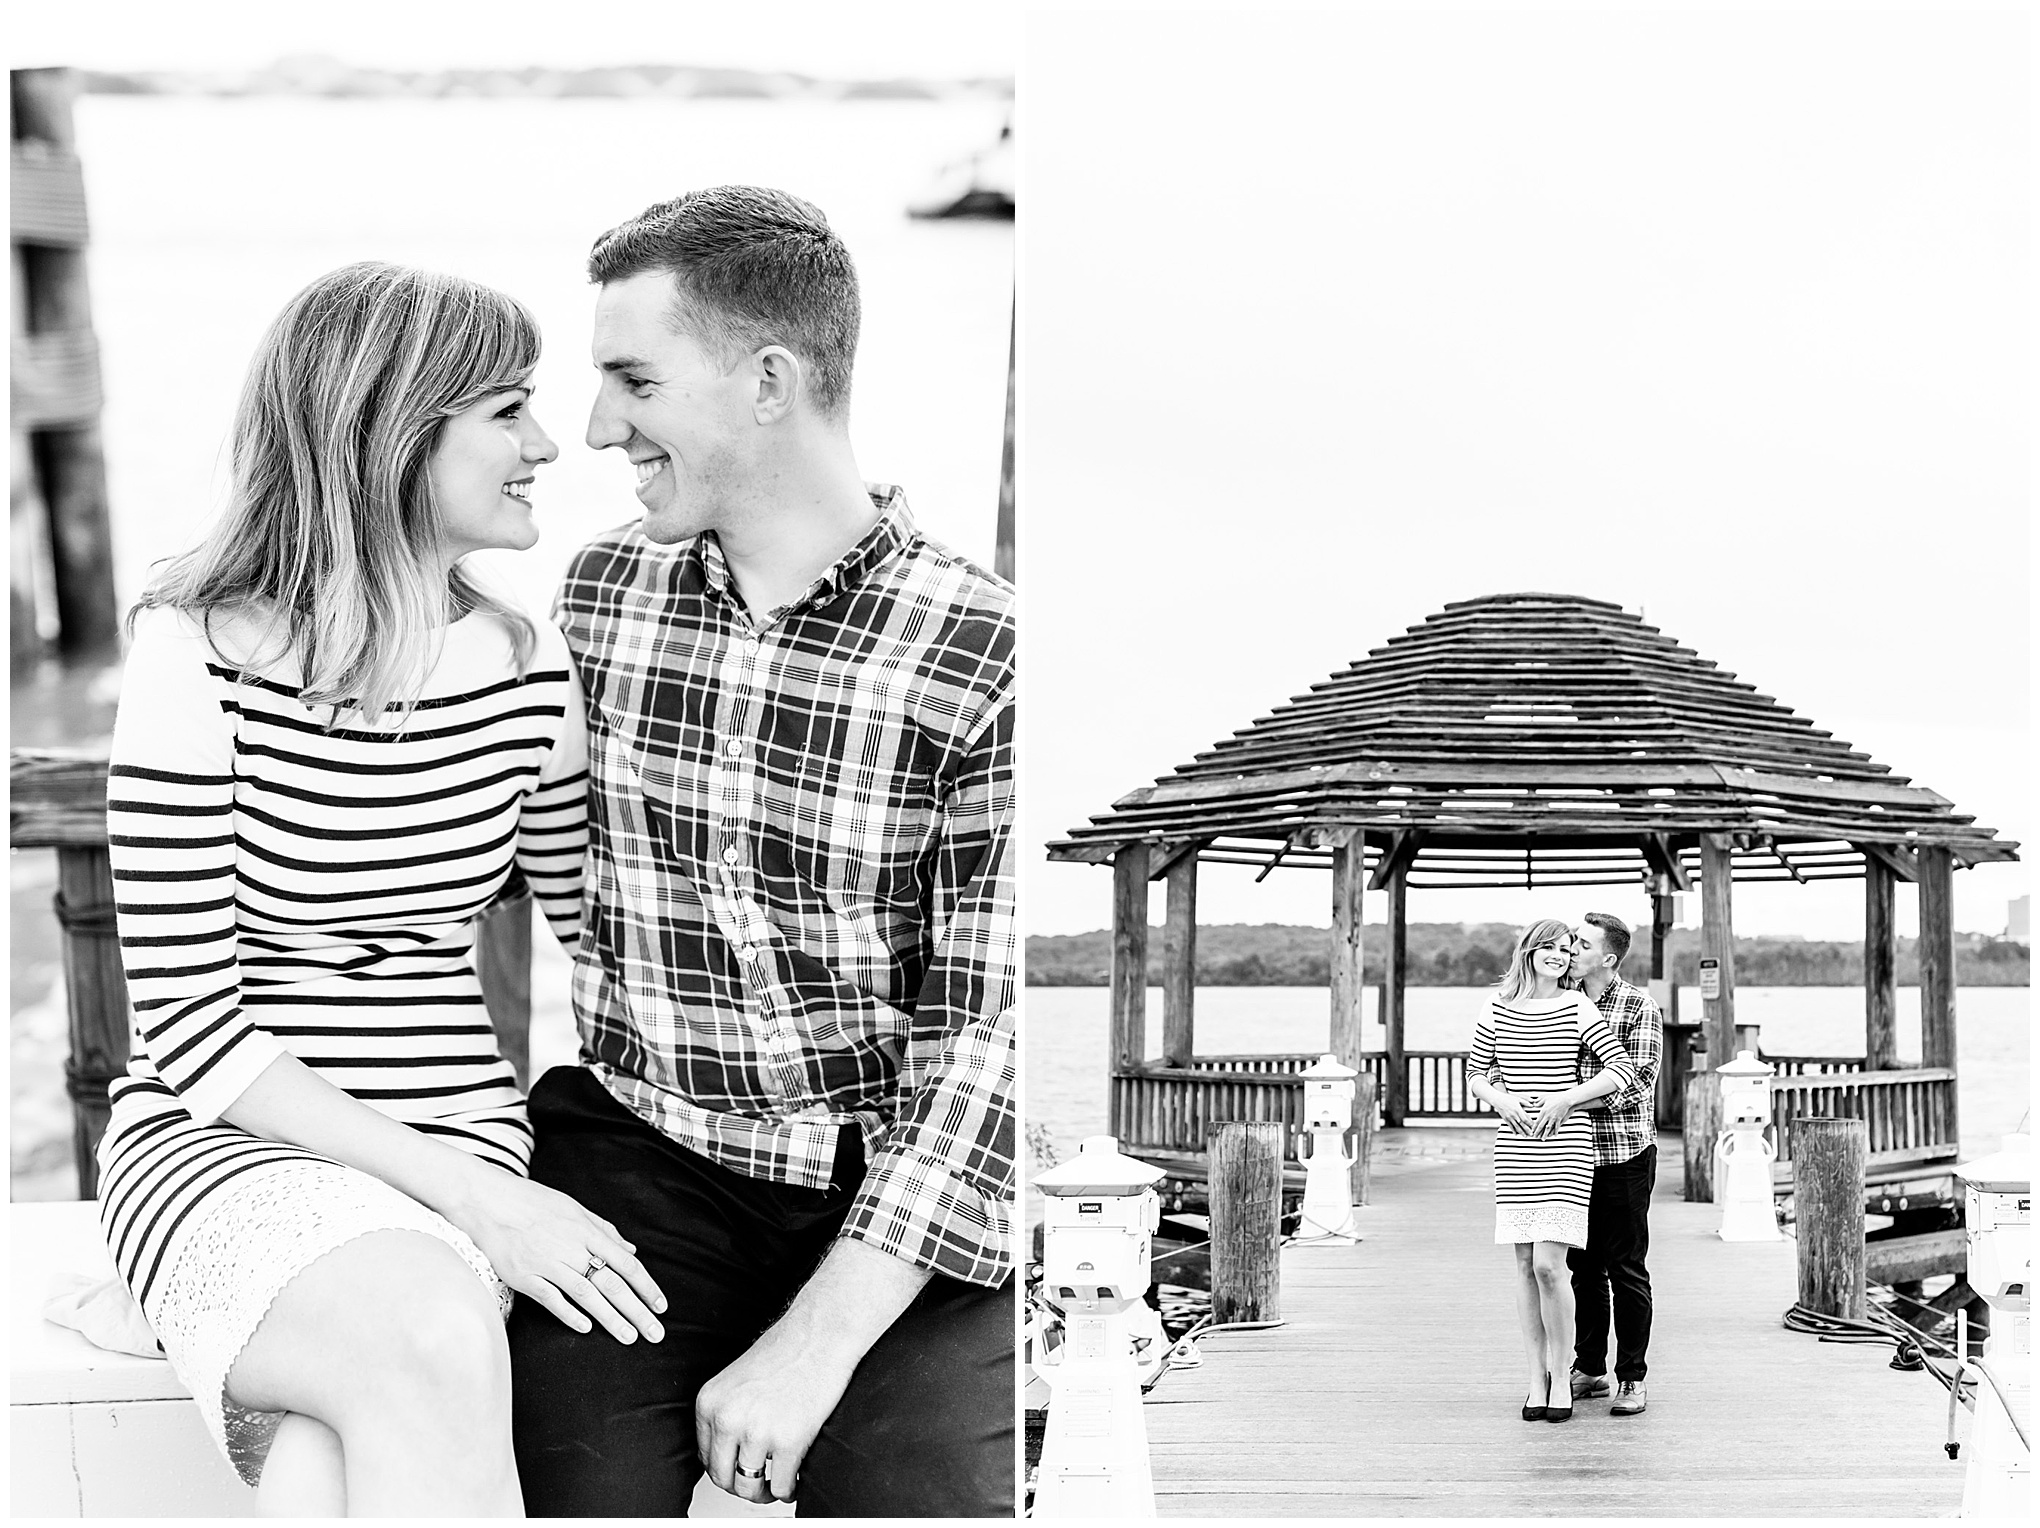 Old Town Alexandria pregnancy announcement, pregnancy announcement, Old Town Alexandria portraits, waterfront portraits, Old Town Alexandria waterfront, maternity photos, waterfront maternity photos, nautical maternity photos, Rachel E.H. Photography, D.C. wedding photography, VA wedding photographer, MD wedding photographer, black and white portraits, expectant couple